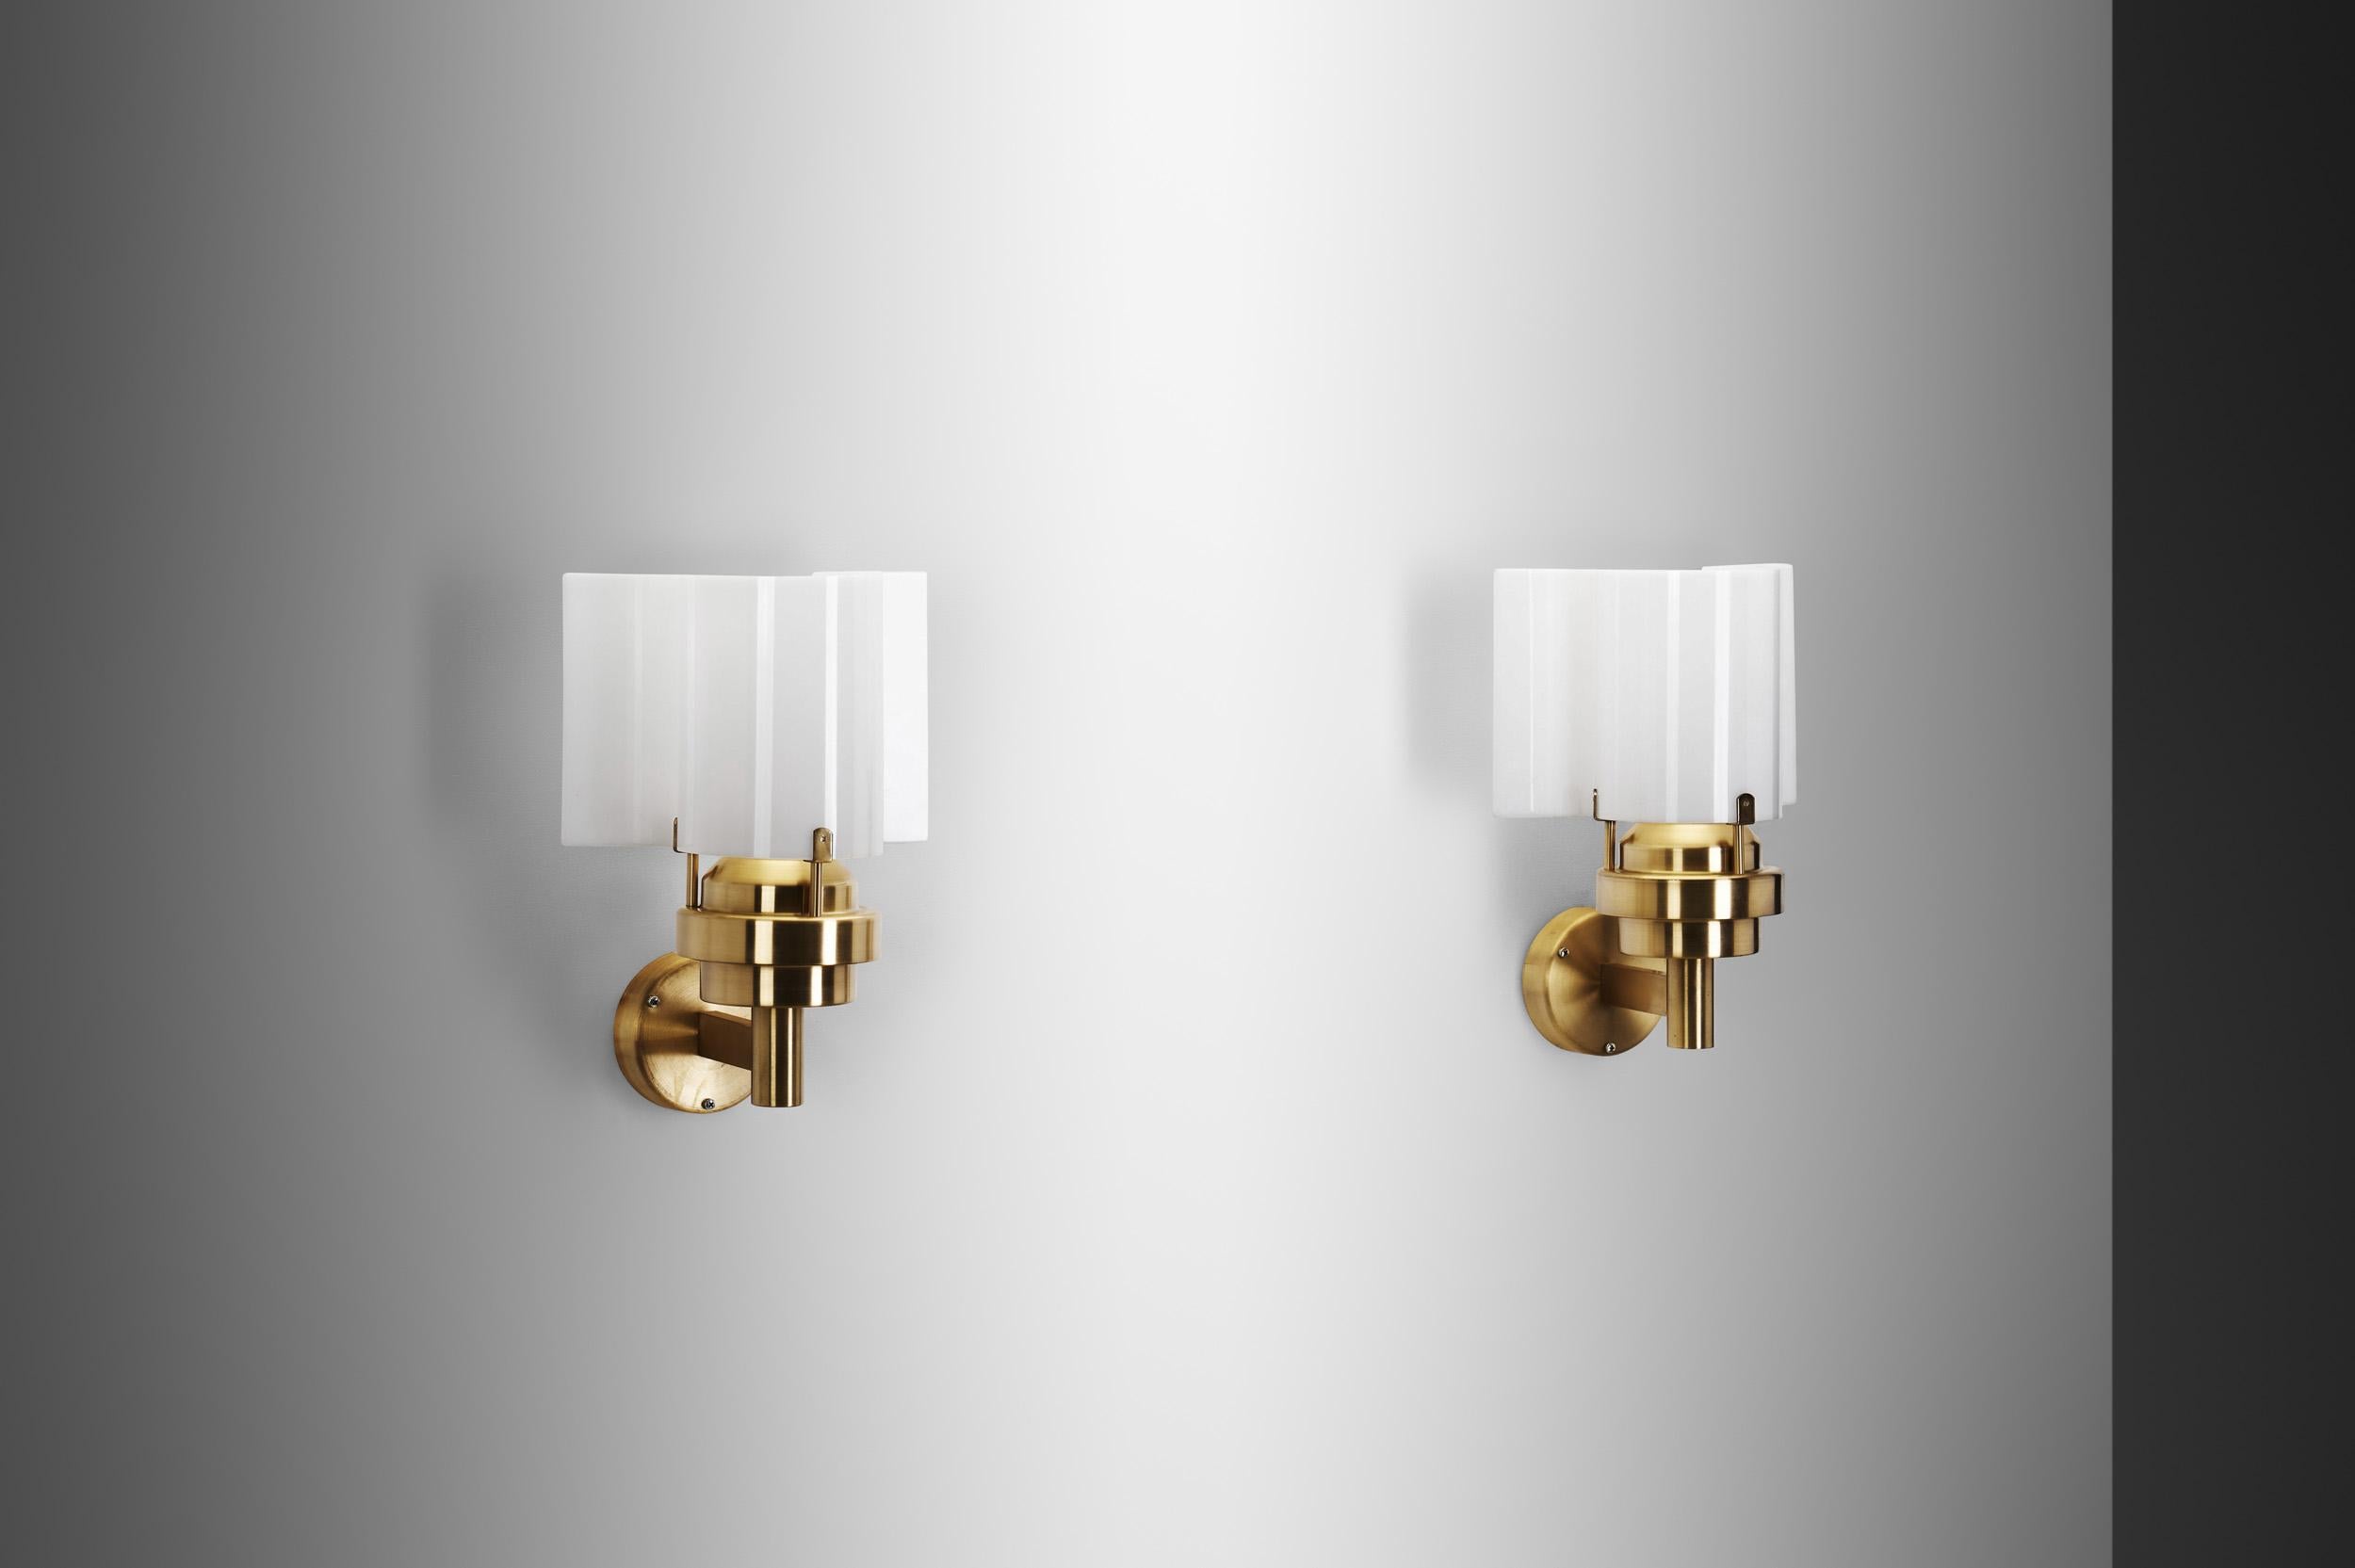 Brass and Acrylic Glass Wall Lamps by Stockmann Orno, Finland 1960s For Sale 1